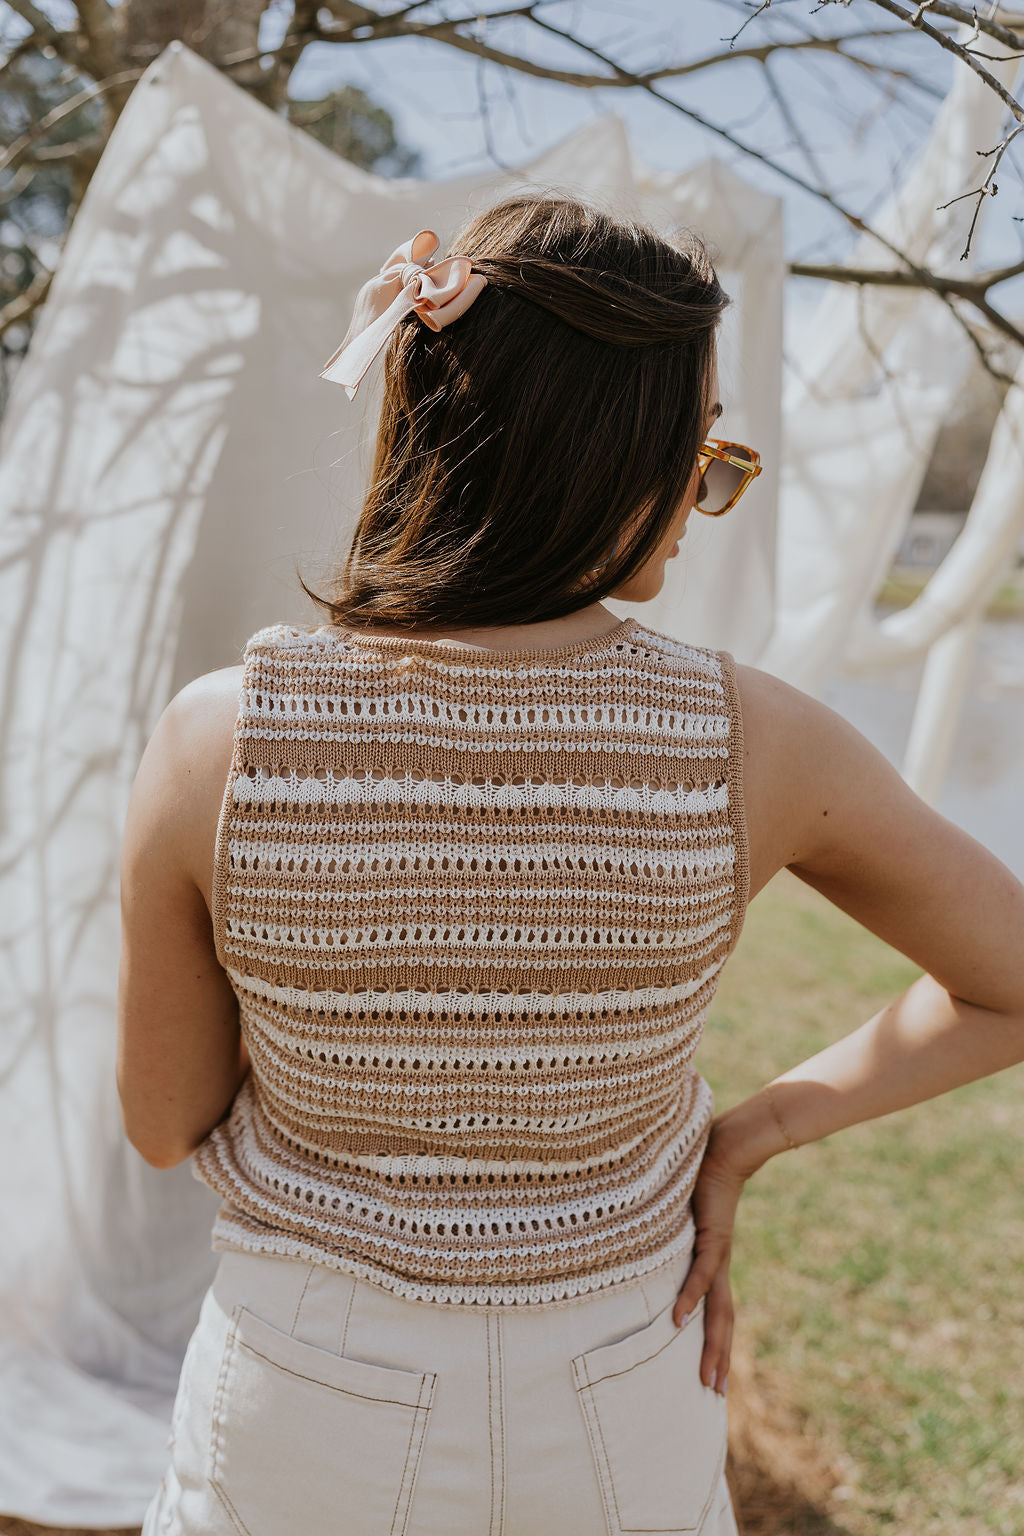 Back view of female model wearing the Mallory Taupe & Cream Crochet Tank that has taupe and cream crochet fabric, an open front with a tie, and a sleeveless body. Worn with cream denim shorts.